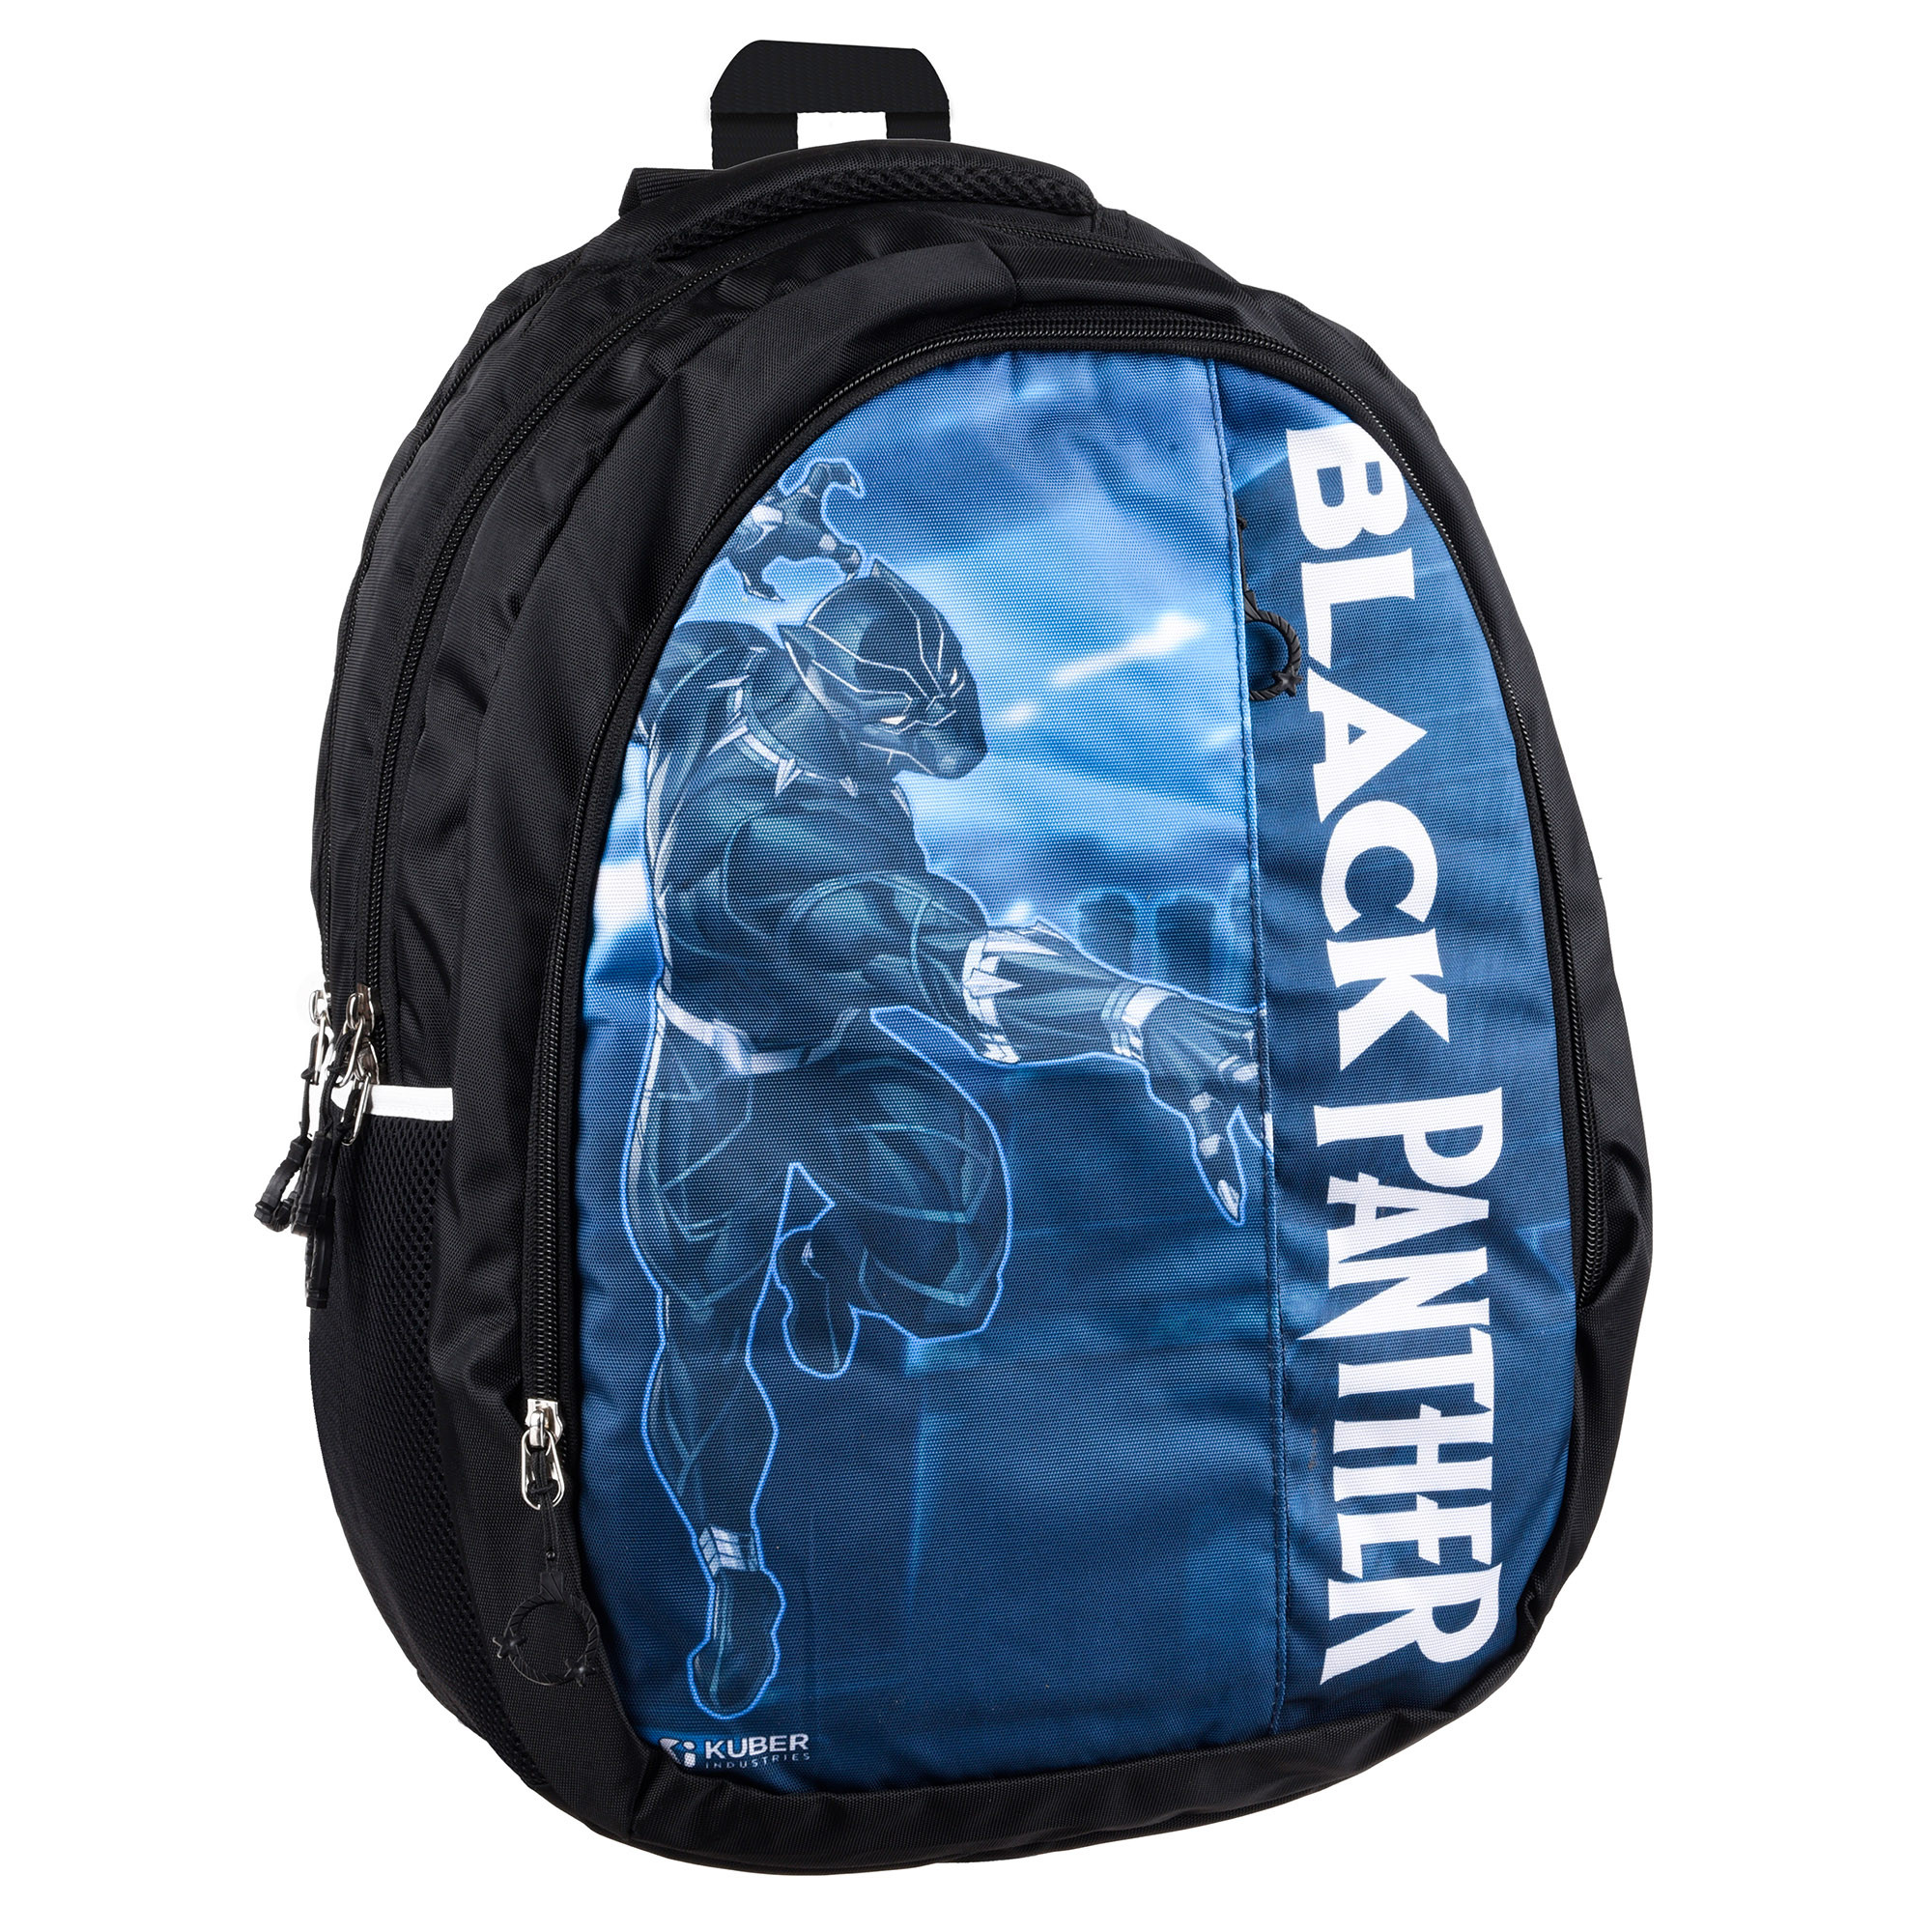 School Bags - Buy School Bags for Boys, Girls, and Kids Online at American  Tourister